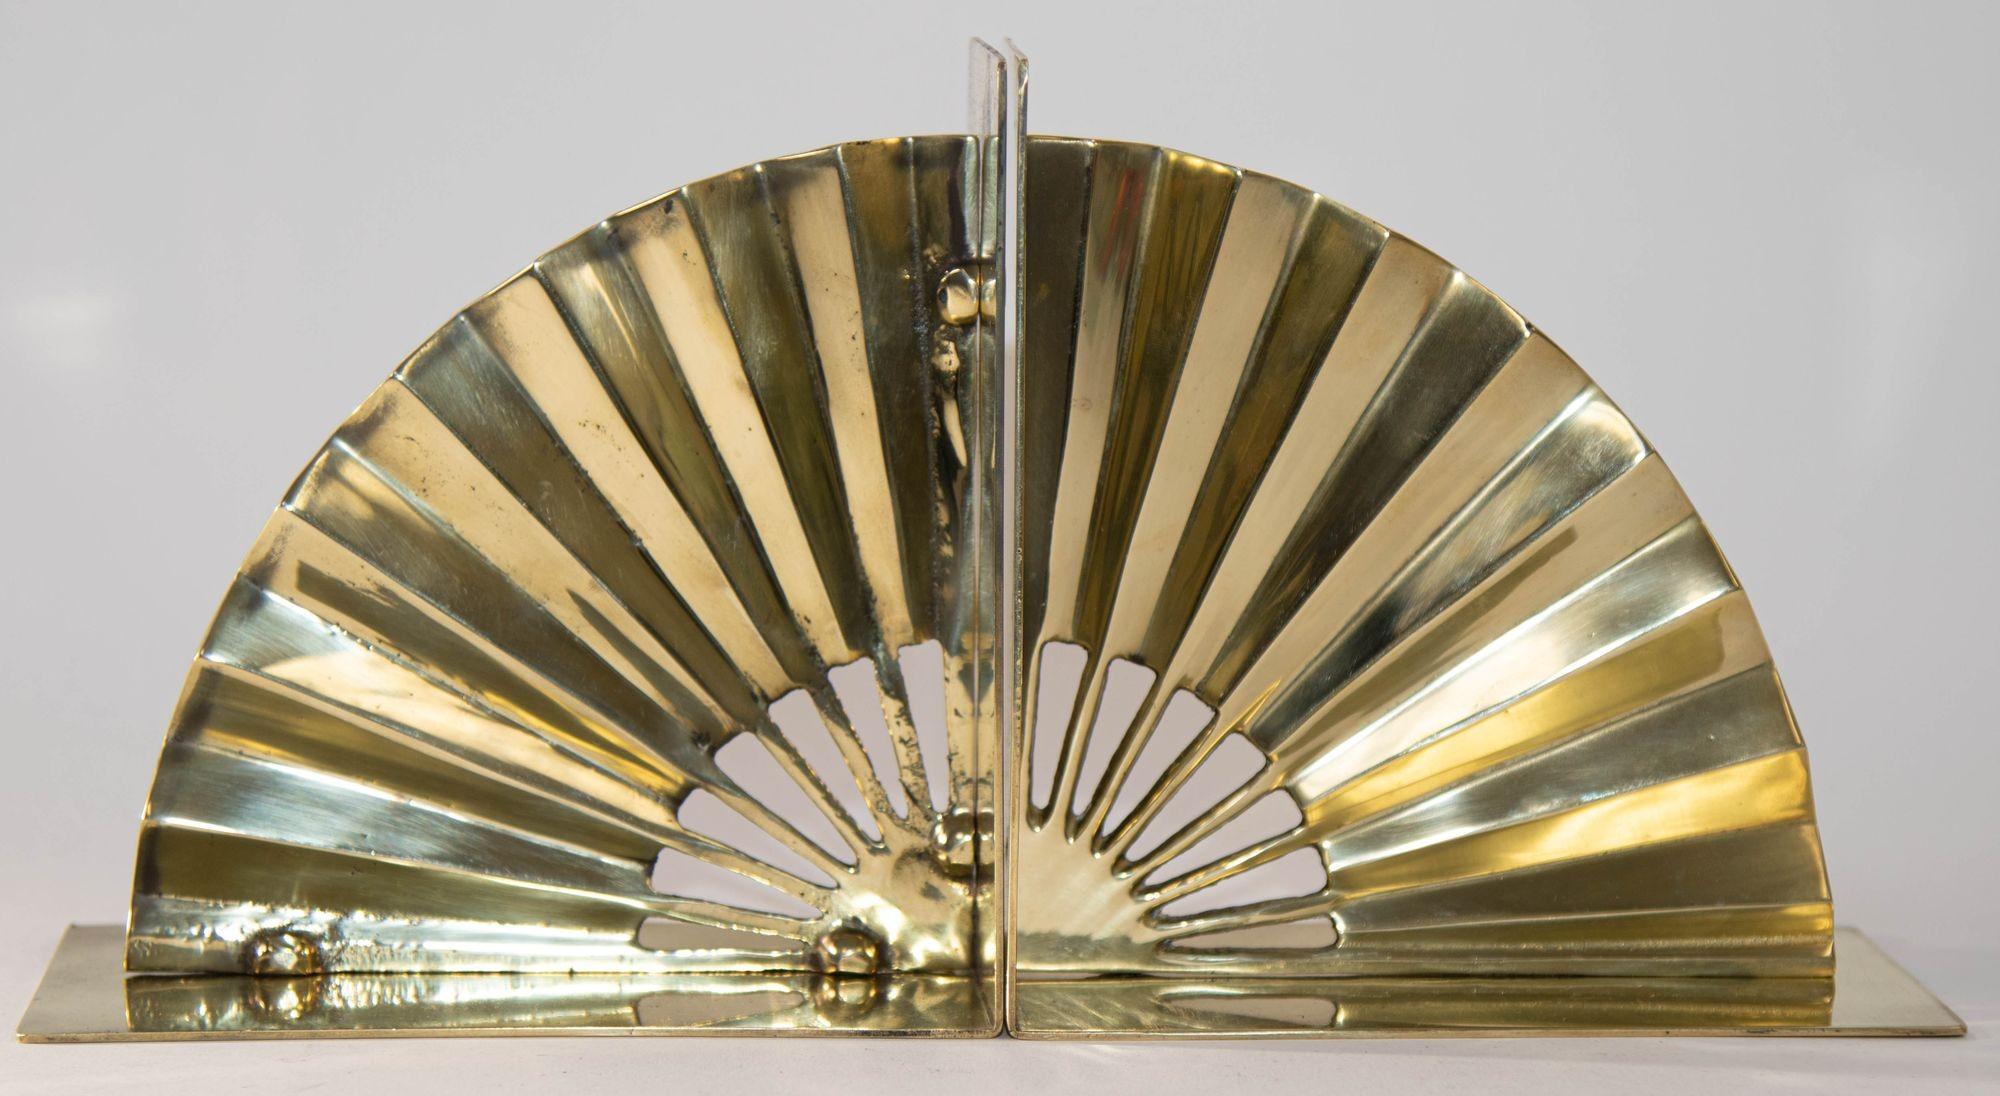 1950s Hollywood Regency Solid Polished Brass Asian Fan Shaped Bookends.
These are stunning and highly decorative set of fan form bookends.
Circa 1950s. A Fine Pair of Brass Fan Bookends.
These Mid Century Modern polished brass Asian Fan bookends are